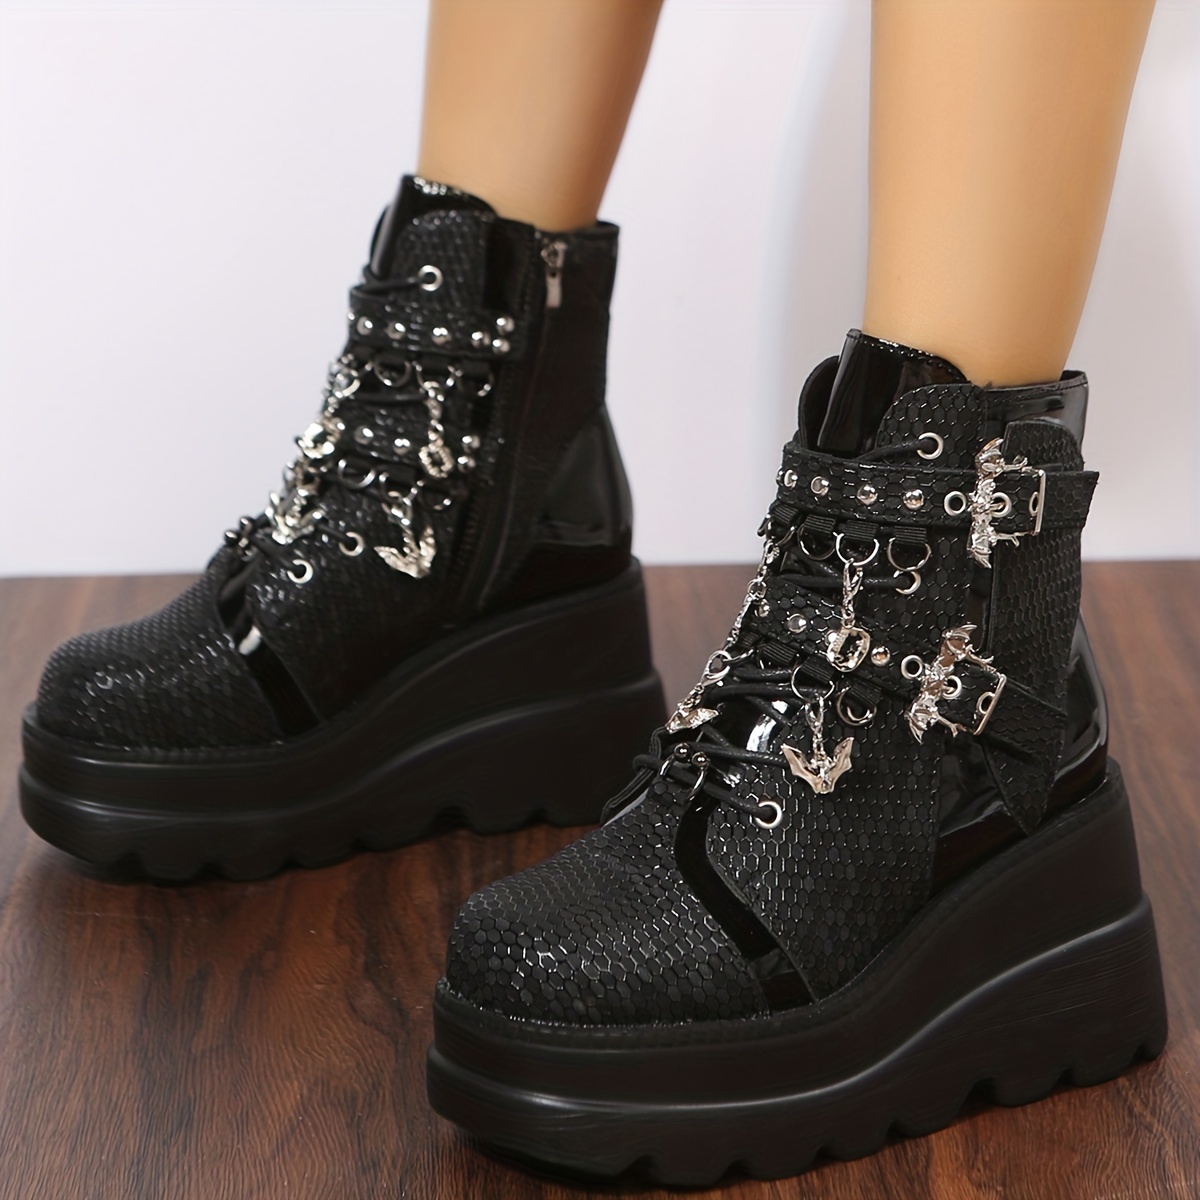 Gothic Women's Platform Ankle Boots with Loose Chain Lace Up Buckles and Thin Heels